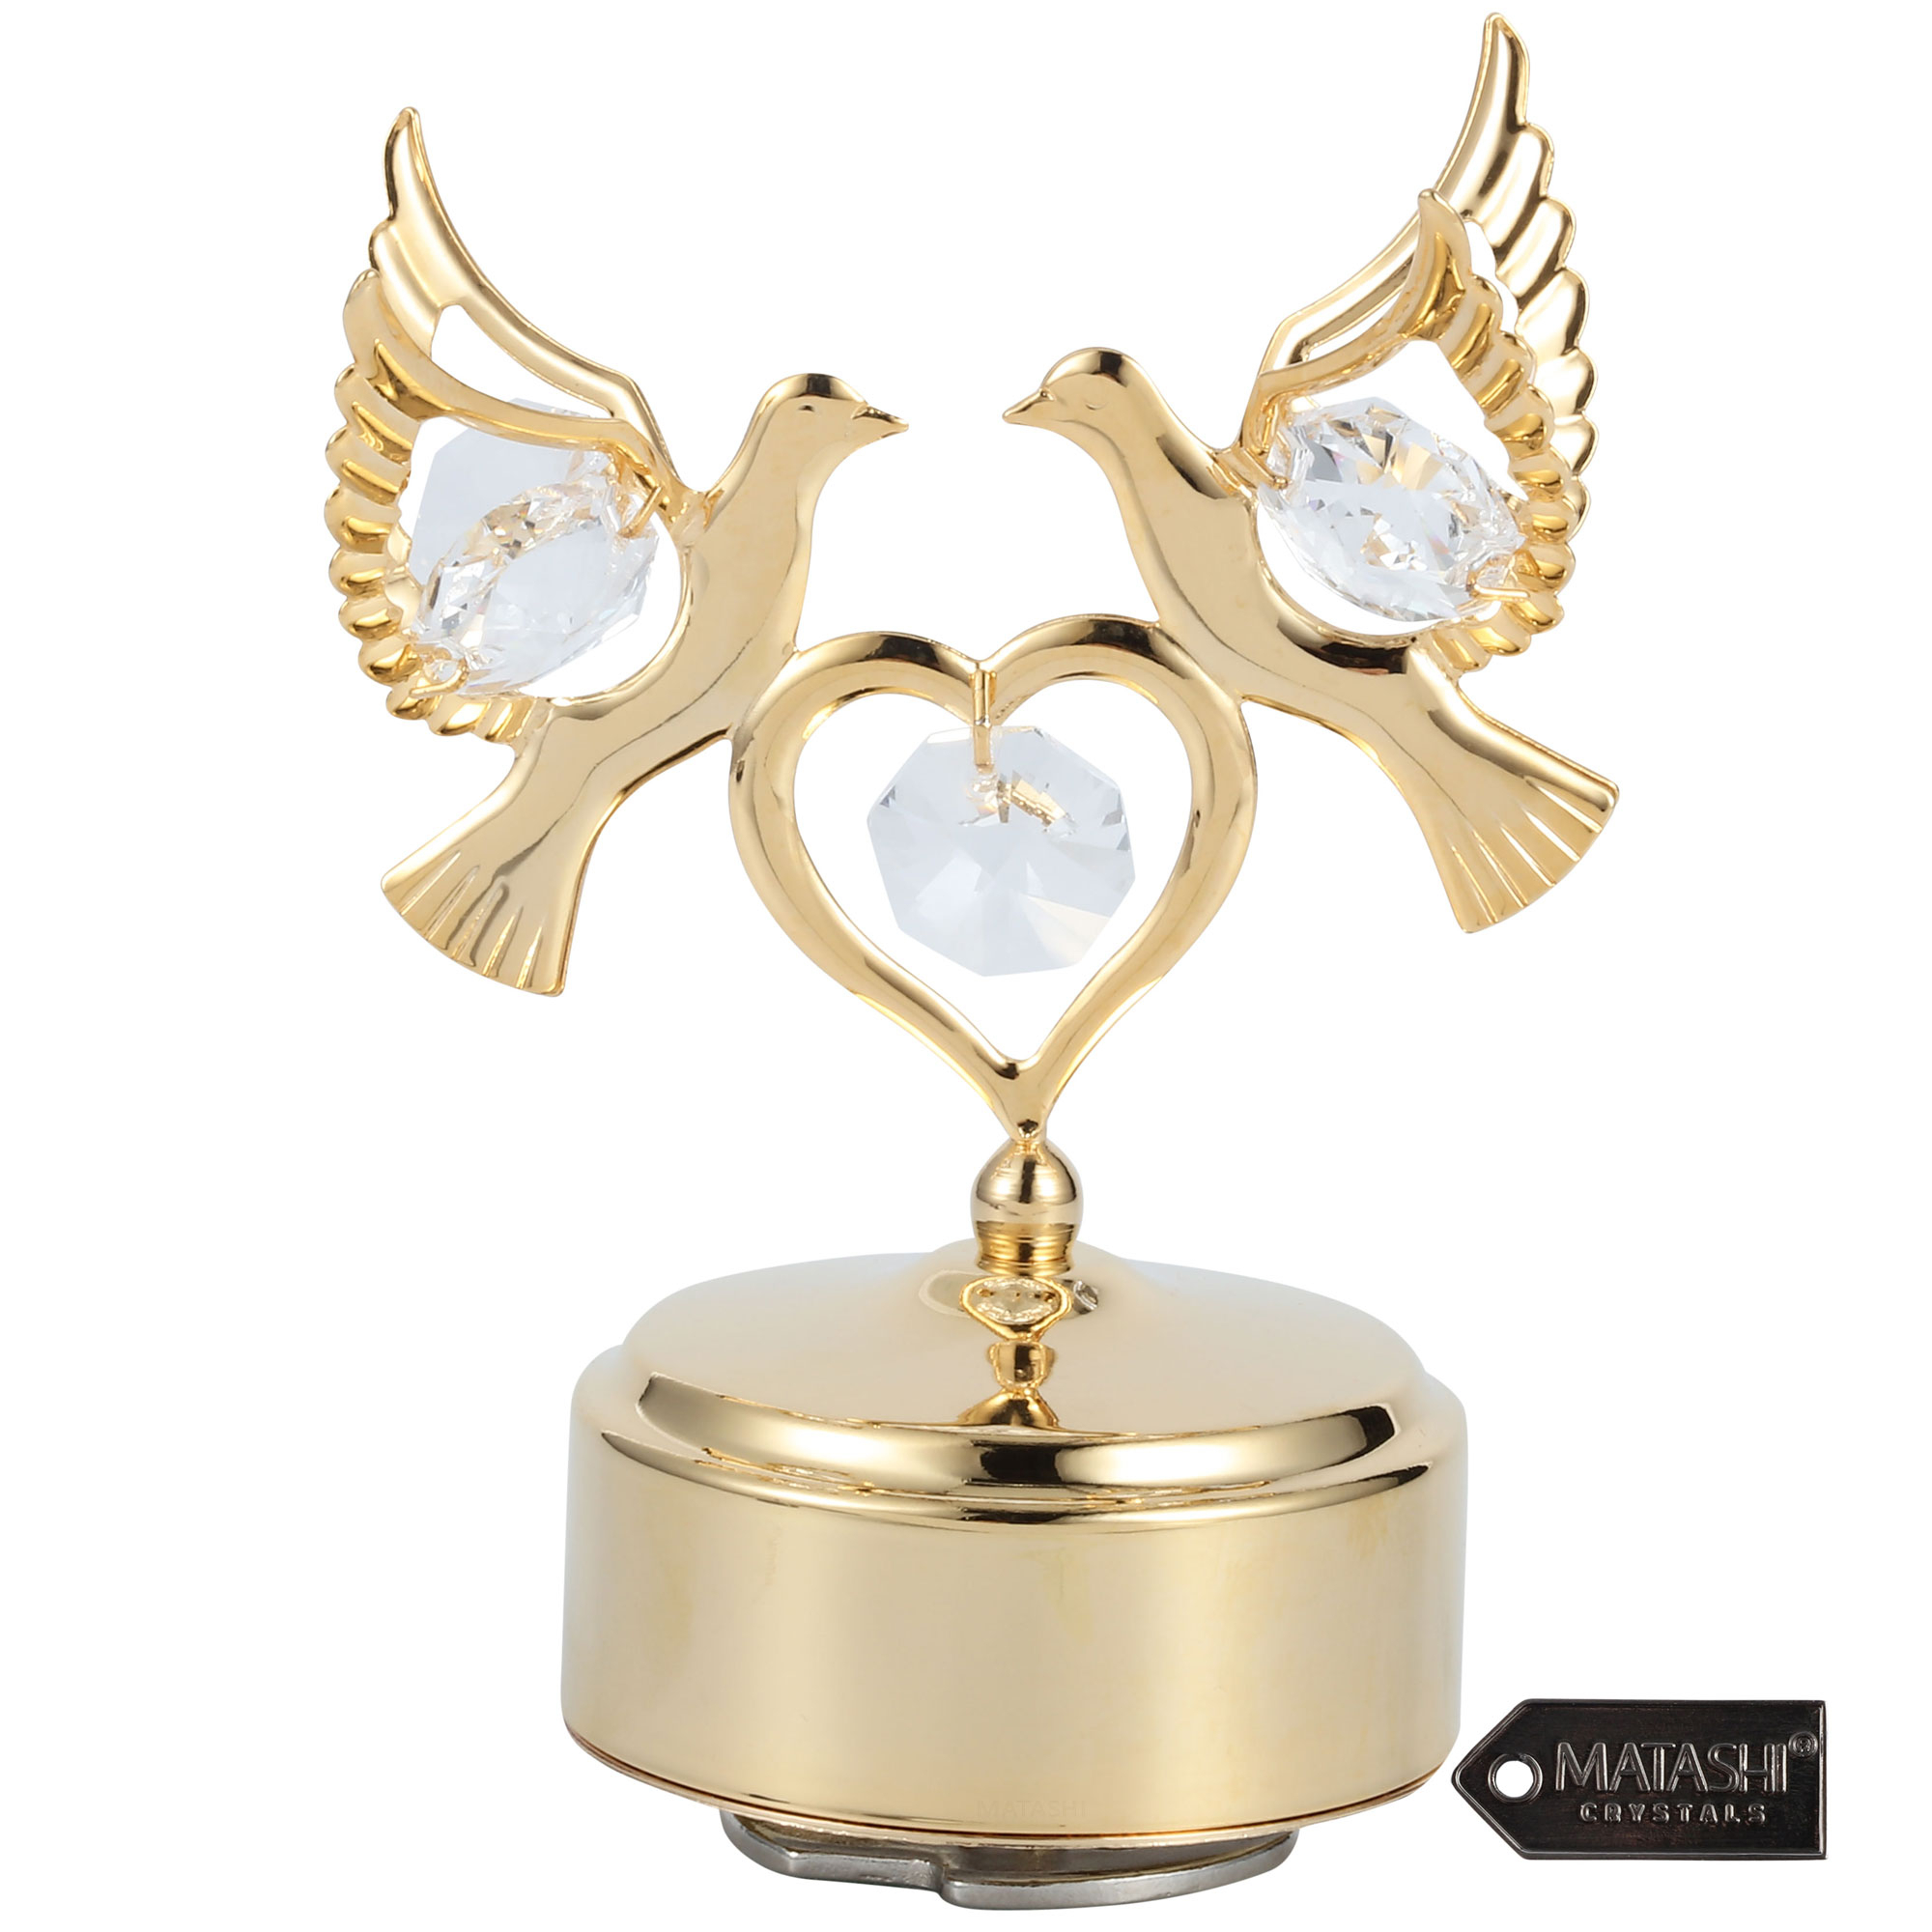 24K Gold Plated Music Box With Crystal Studded Love Doves Figurine On A Smooth Base By Matashi, Swan Lake